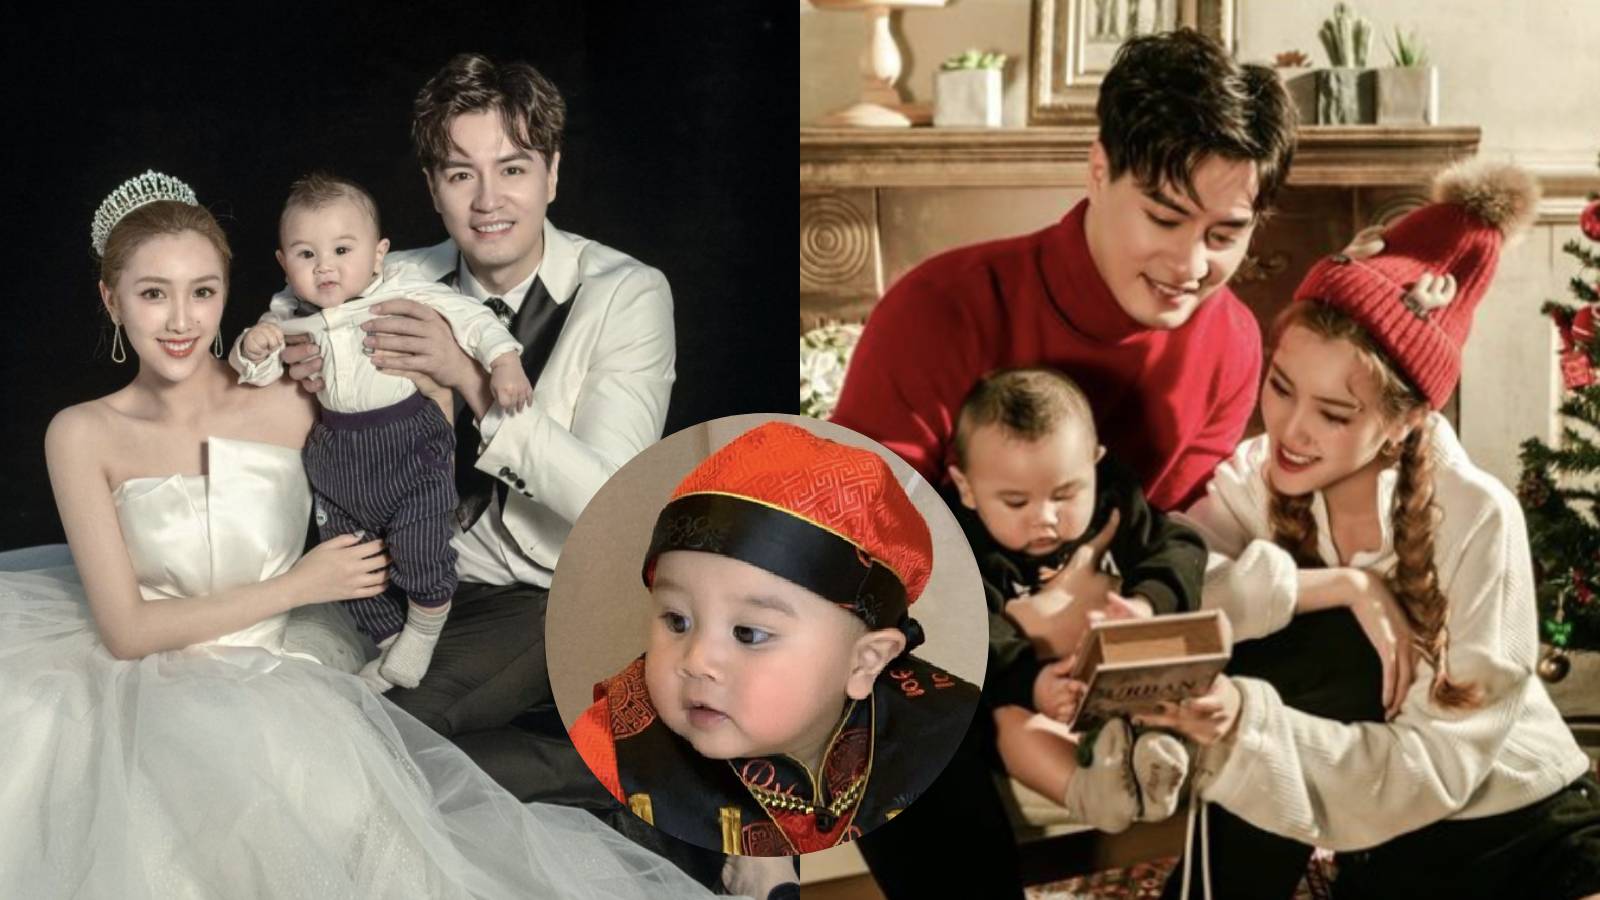 Zhang Zhenhuan And His Wife Announced The Arrival Of Their Baby Boy With Loads Of Adorable Pics